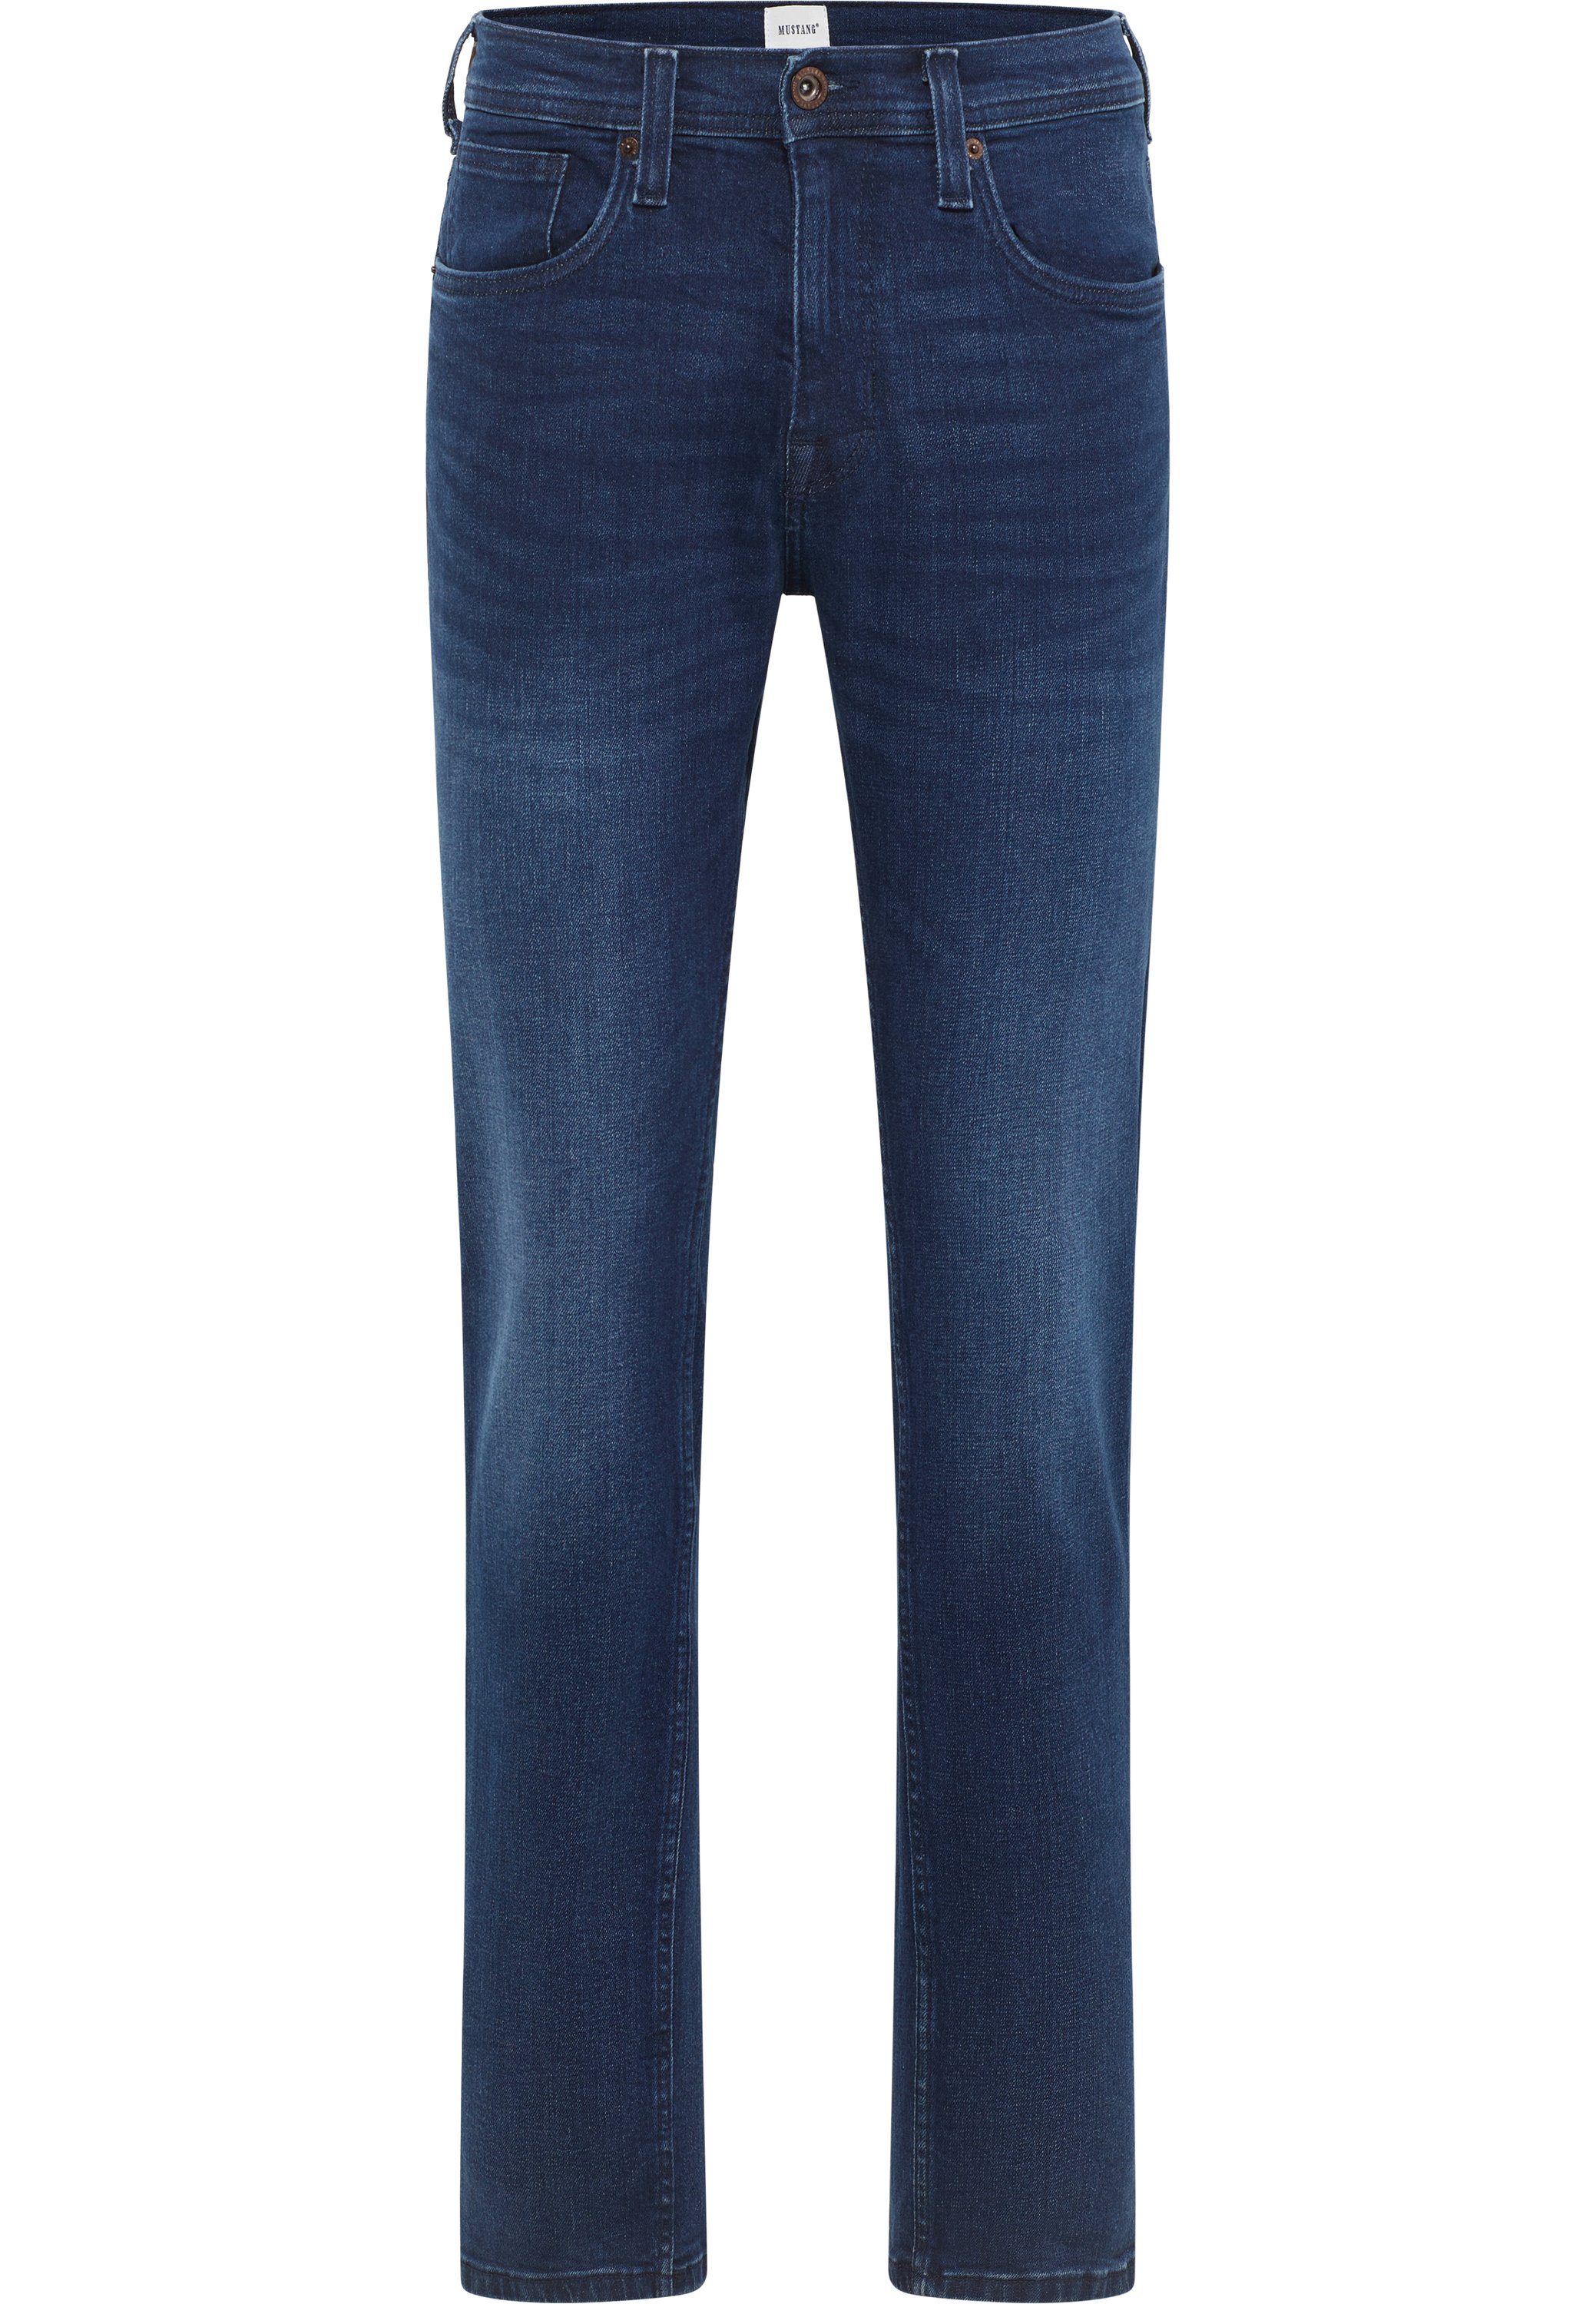 MUSTANG 5-Pocket-Jeans Mustang Hose Style Orlando Slim Mustang Style Orlando Slim dunkelblau